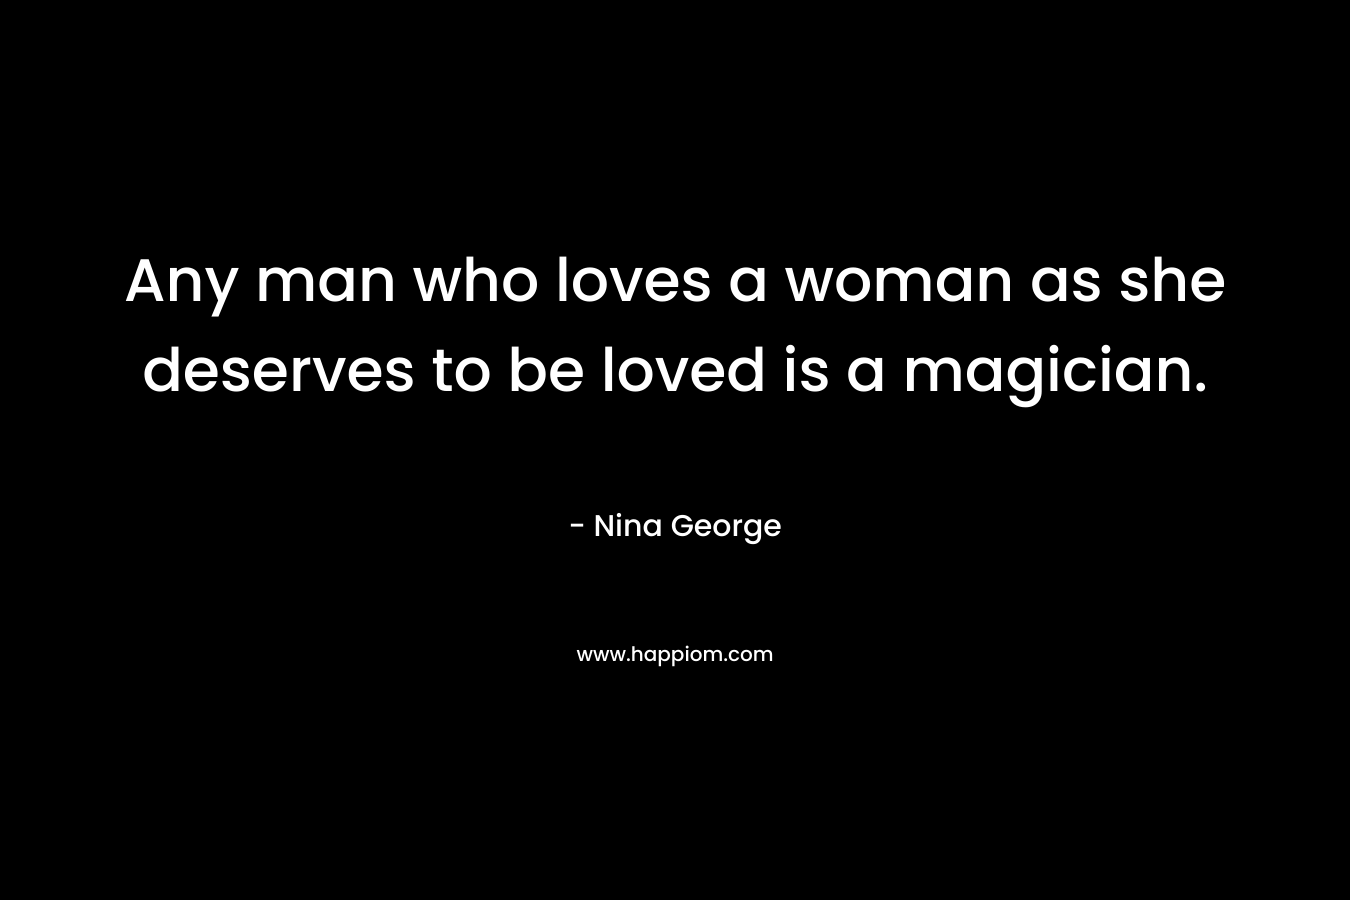 Any man who loves a woman as she deserves to be loved is a magician. – Nina George